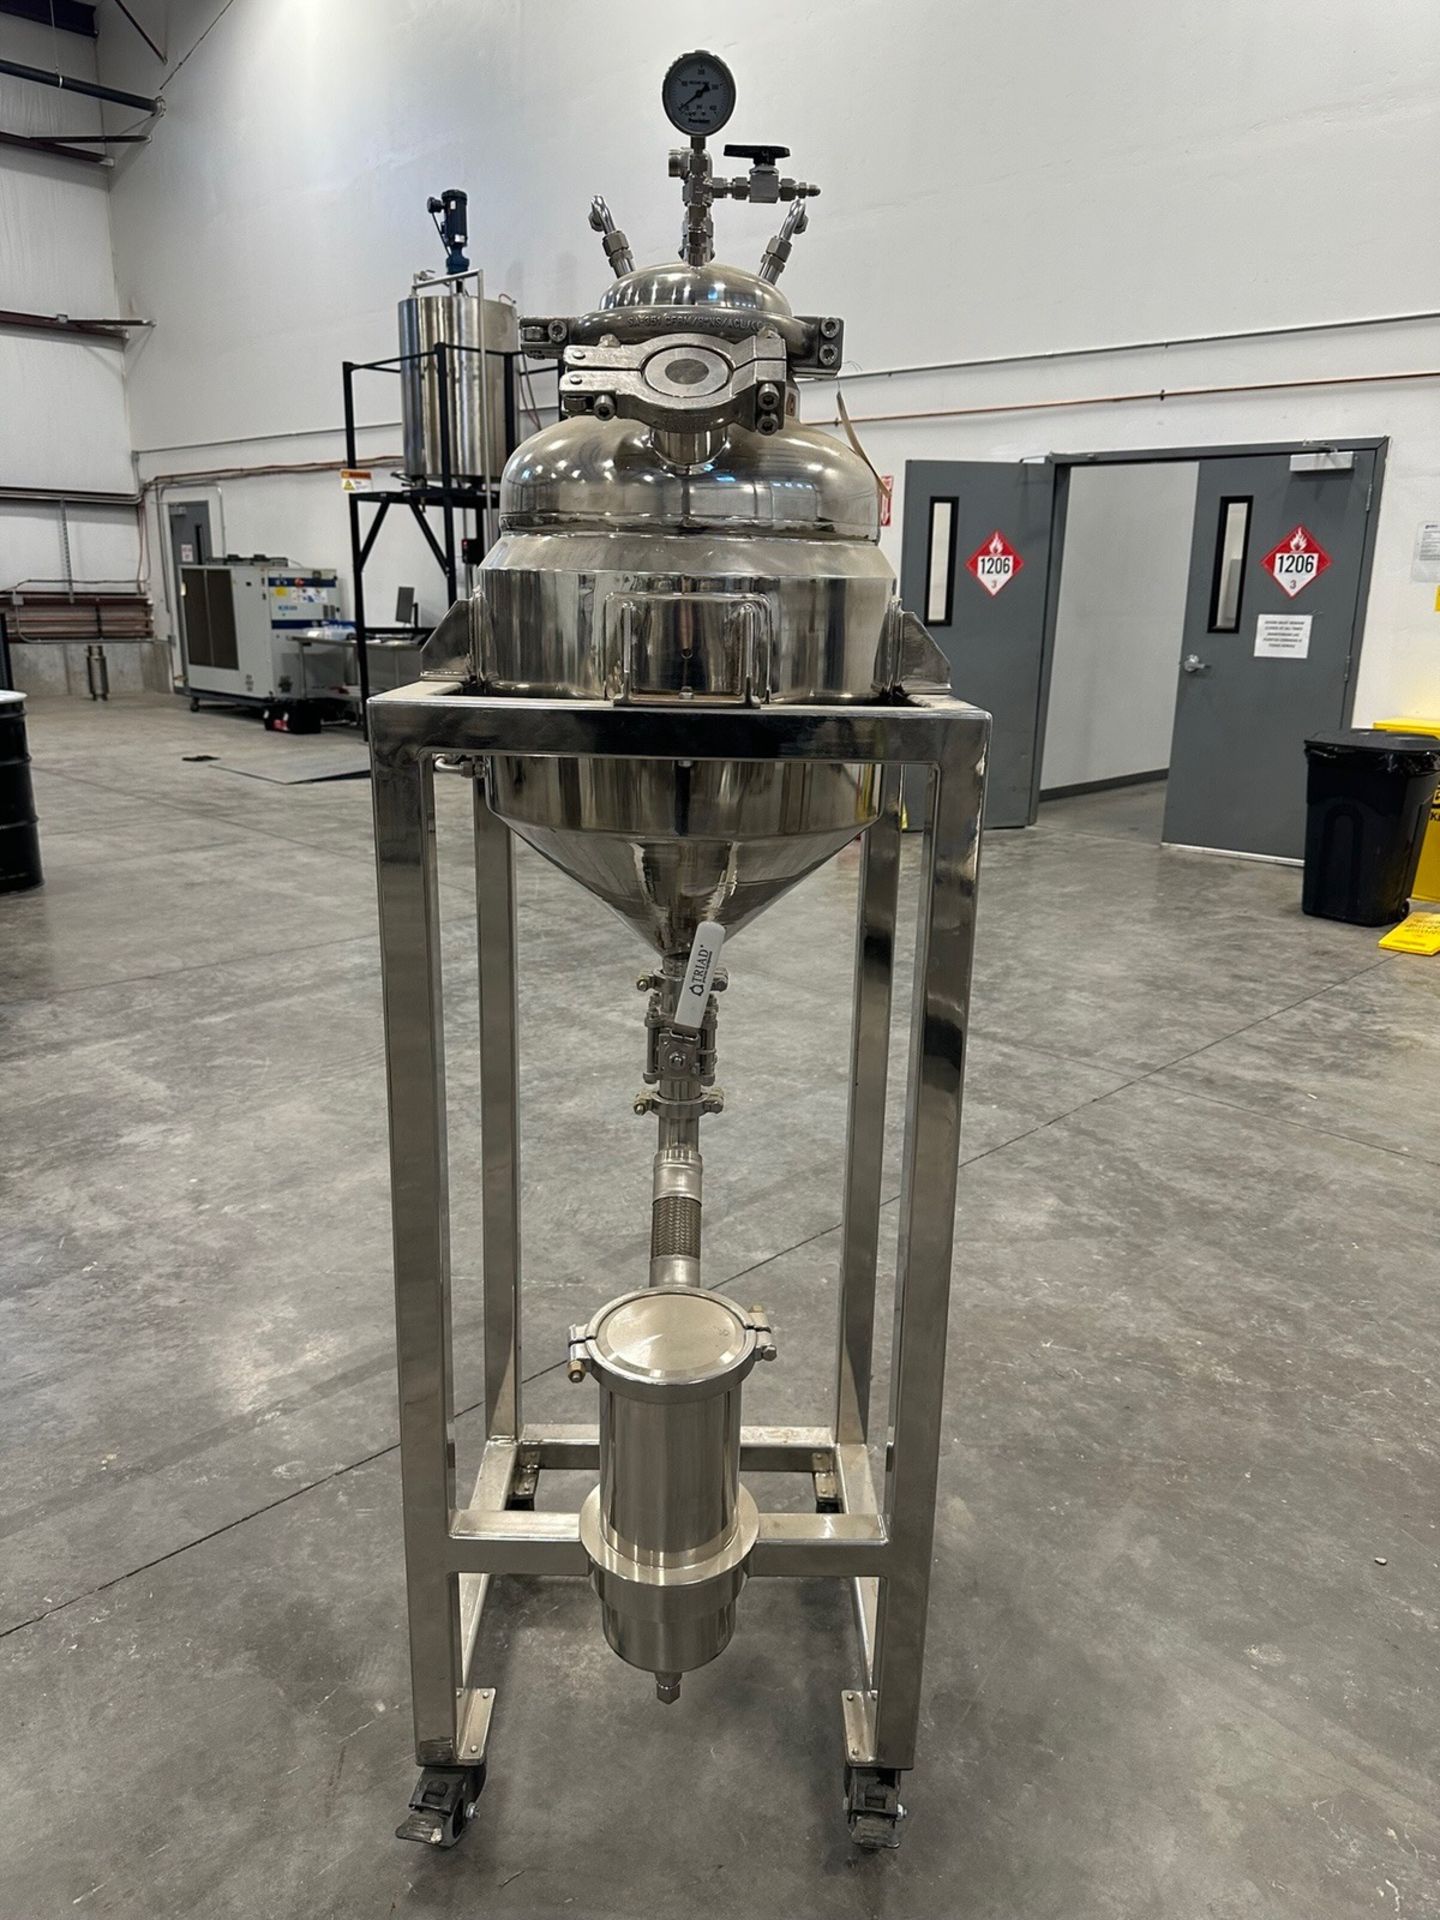 Pressurized Vessel on Stand - Subj to Bulk | Rig Fee $75 - Image 3 of 6